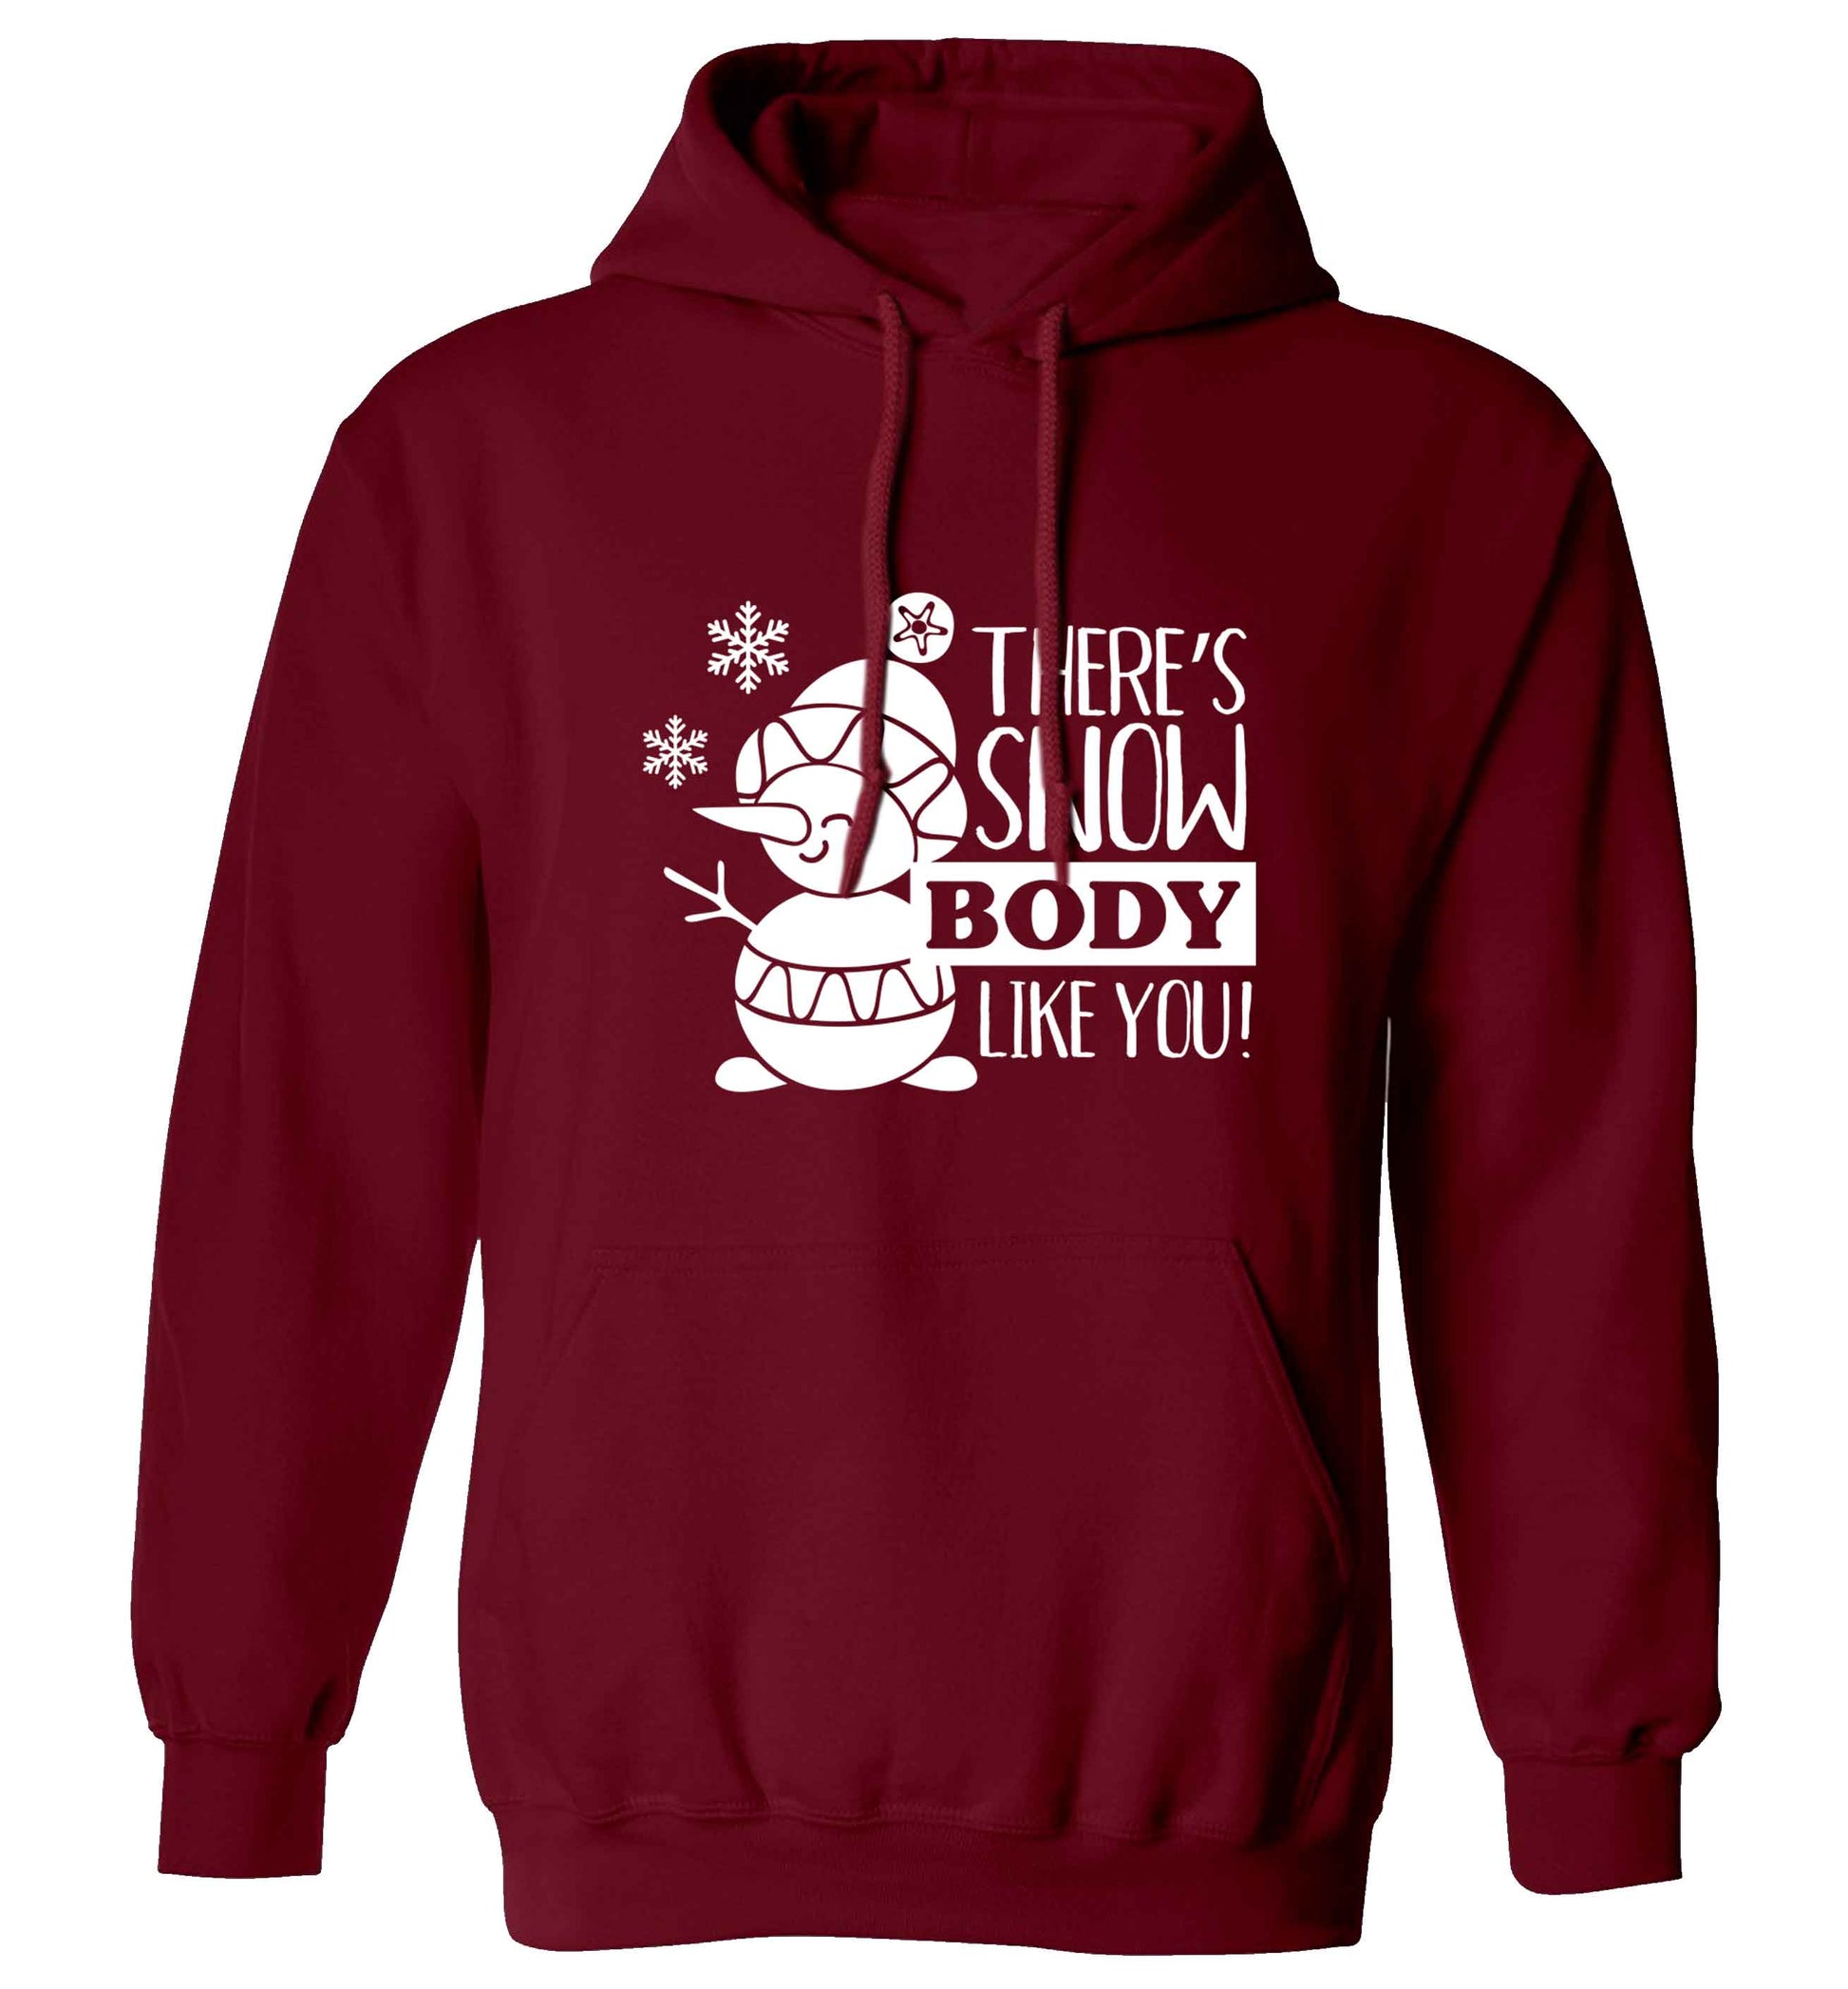 There's snow body like you adults unisex maroon hoodie 2XL